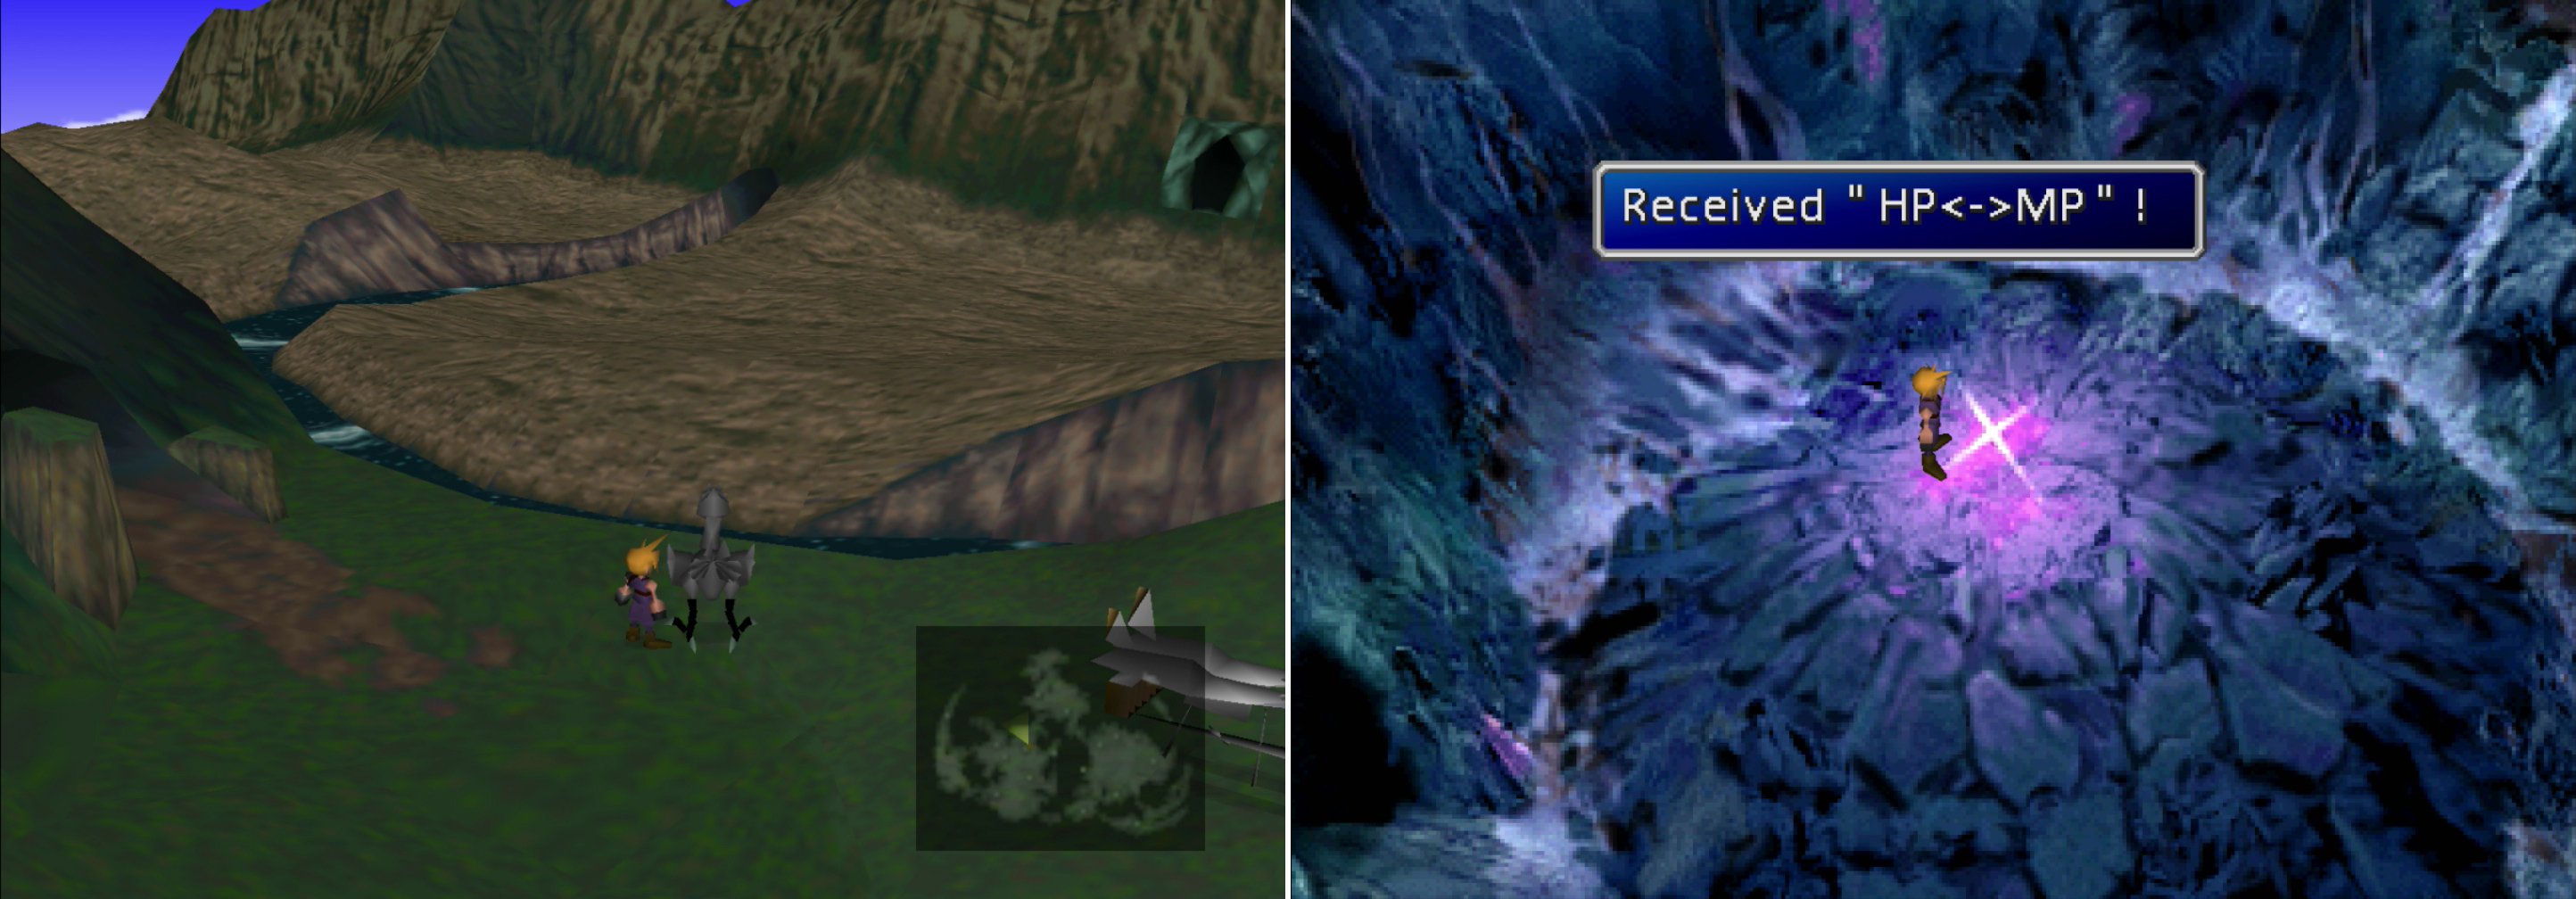 West of Costa del Sol you'll find a cave which can be reach by a Black Chocobo (left). Inside you'll find the… ah… under-whelming HP⇔MP Materia (right).